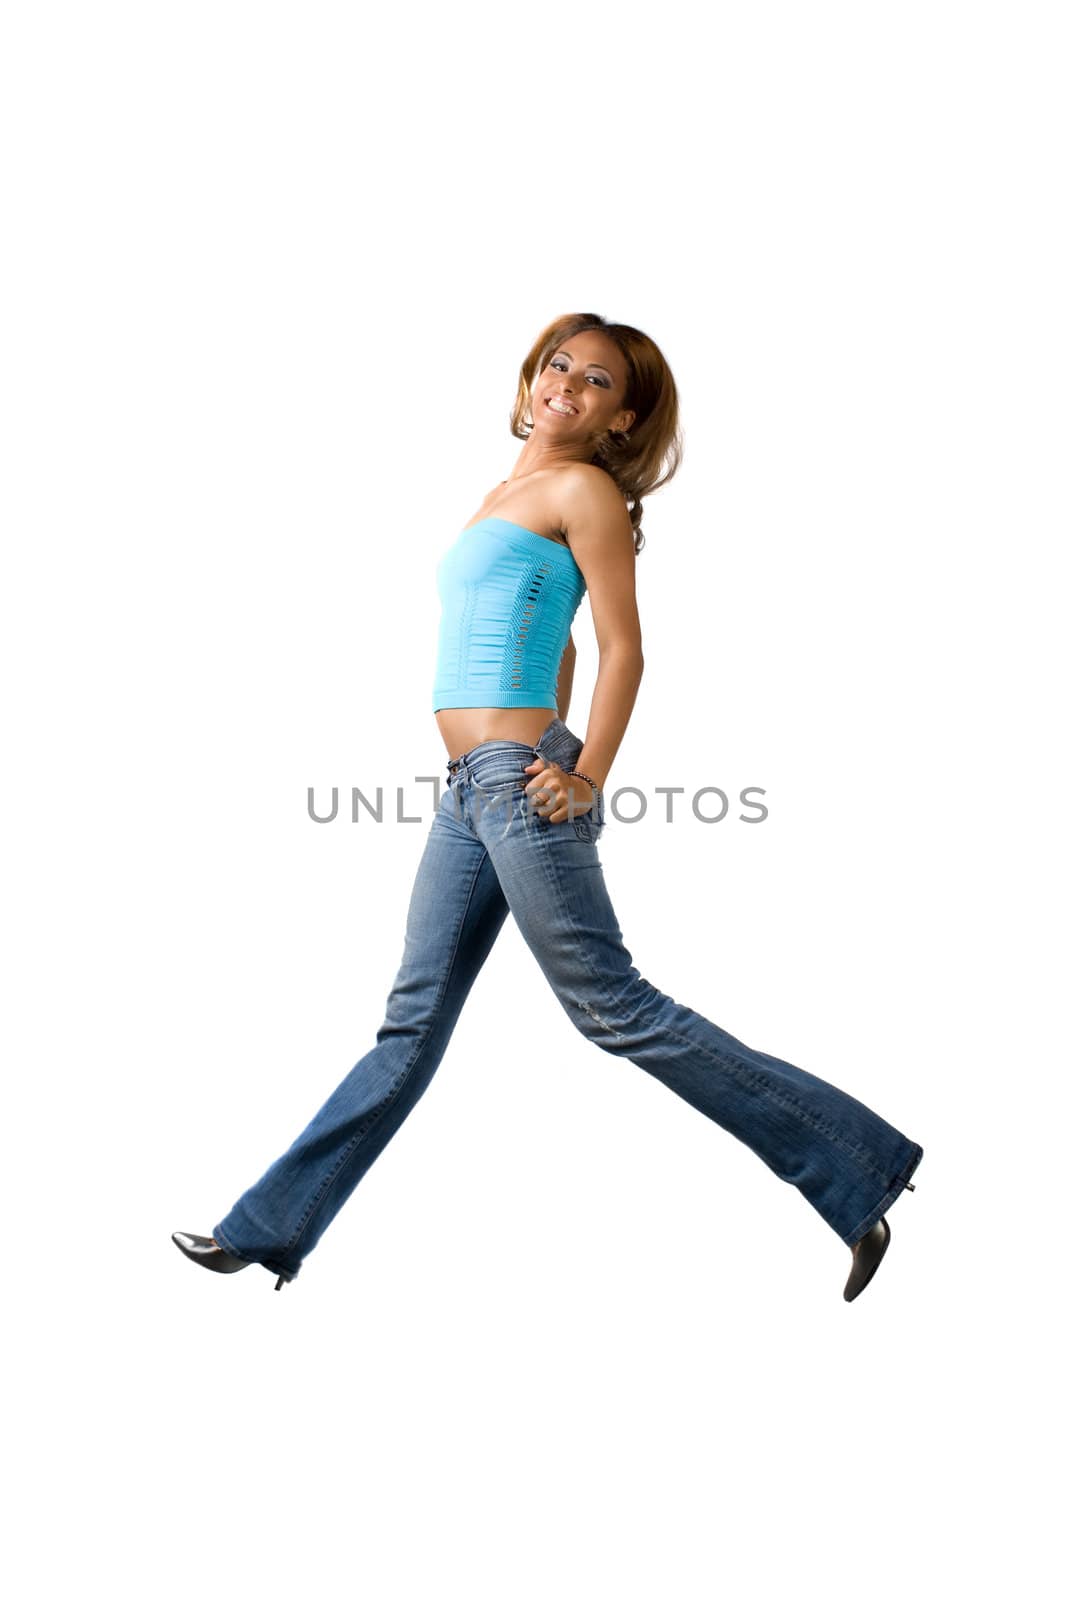 A young woman jumping on a white background.